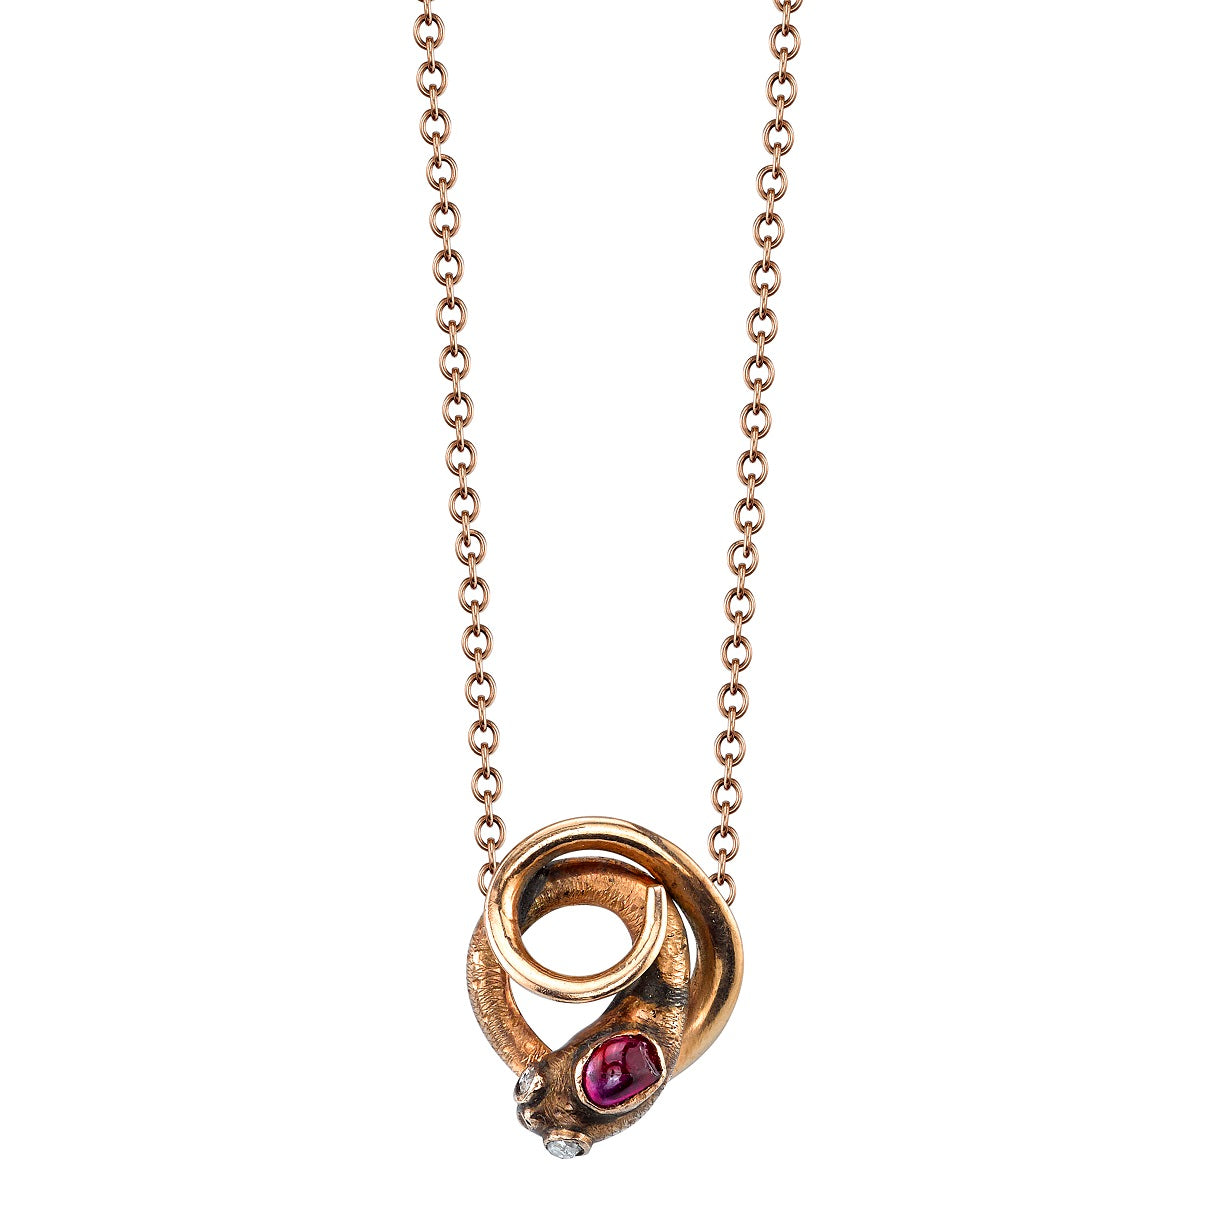 SINGLE STONE BENSON featuring 0.06ct rose cut ruby set in a vintage Victorian era 18K rose gold snake pendant on an 18K rose gold link chain.